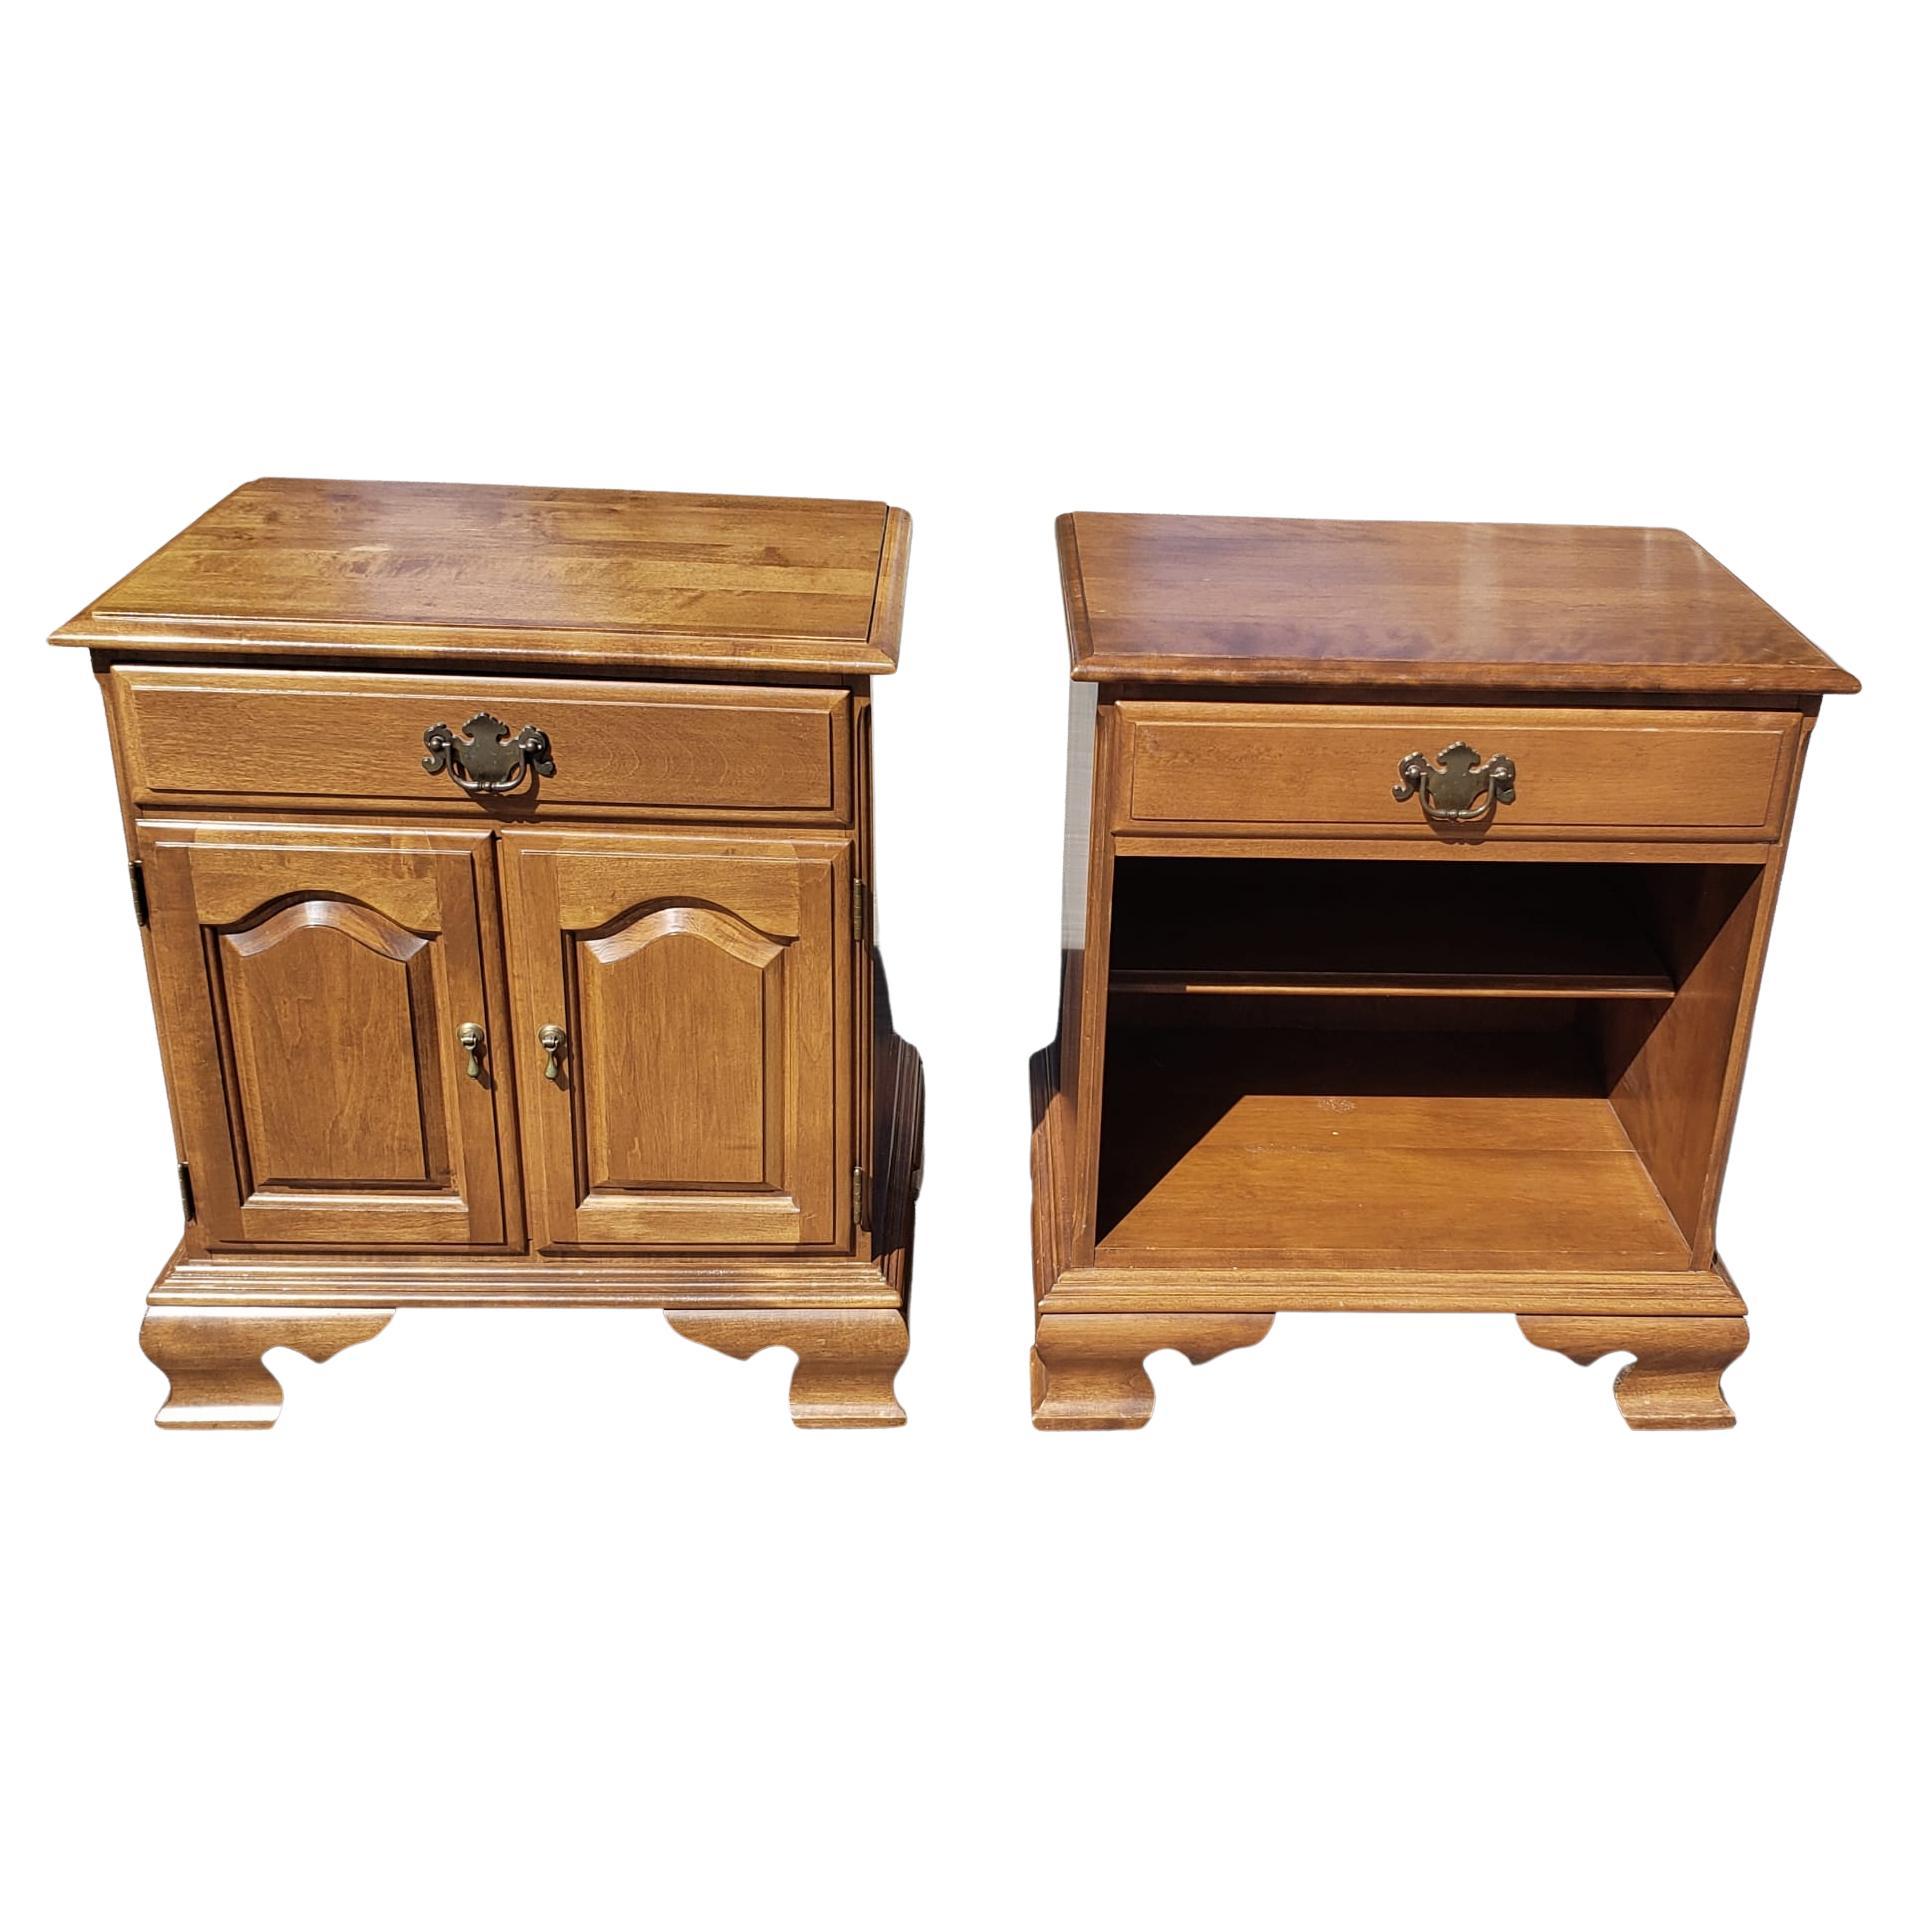 A pair of 1970s Ethan Allen Heirloom Maple Bedside Tables Nightstands in good vintage condition. Feature one drawer with dovetail joints, one adjustable height shelf. Measures 22